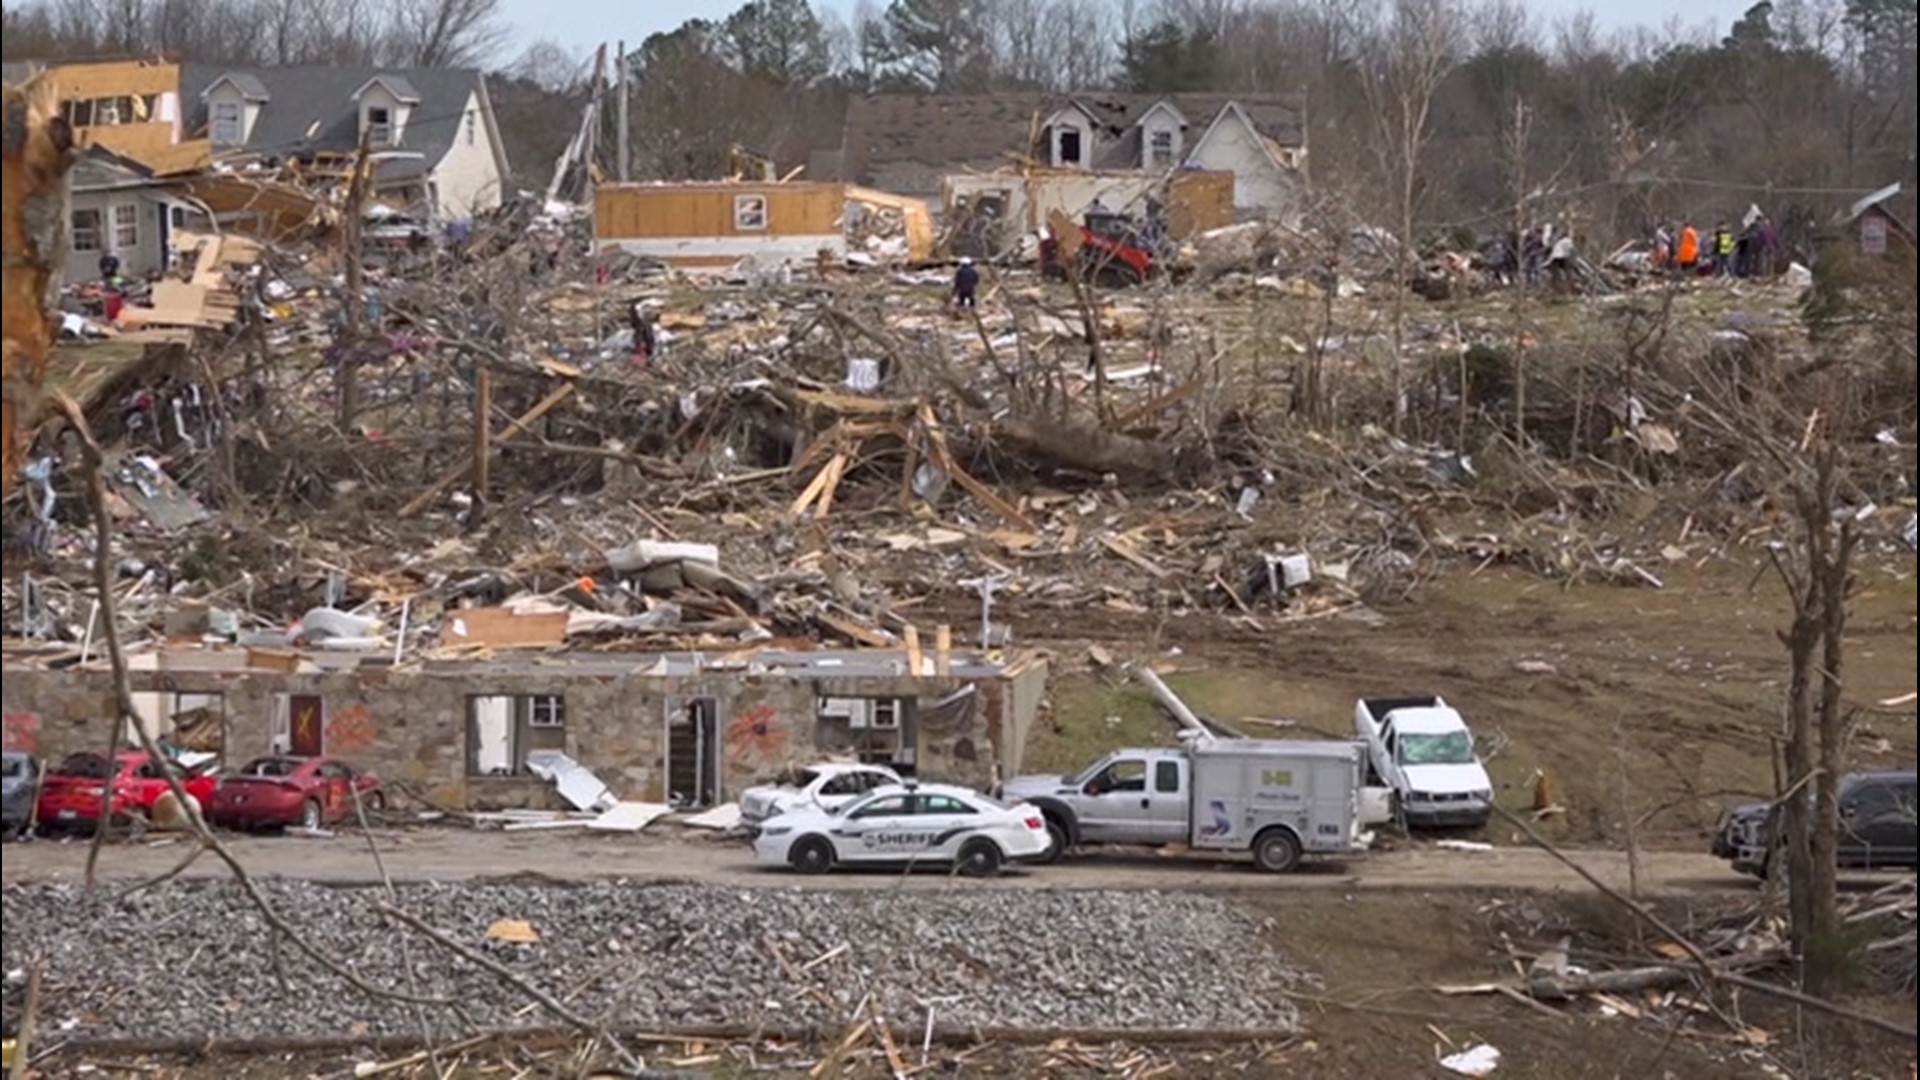 Family members spent March 4 digging through rubble and looking for keepsakes to remember a couple killed by a tornado in Putnam County, Tennessee.